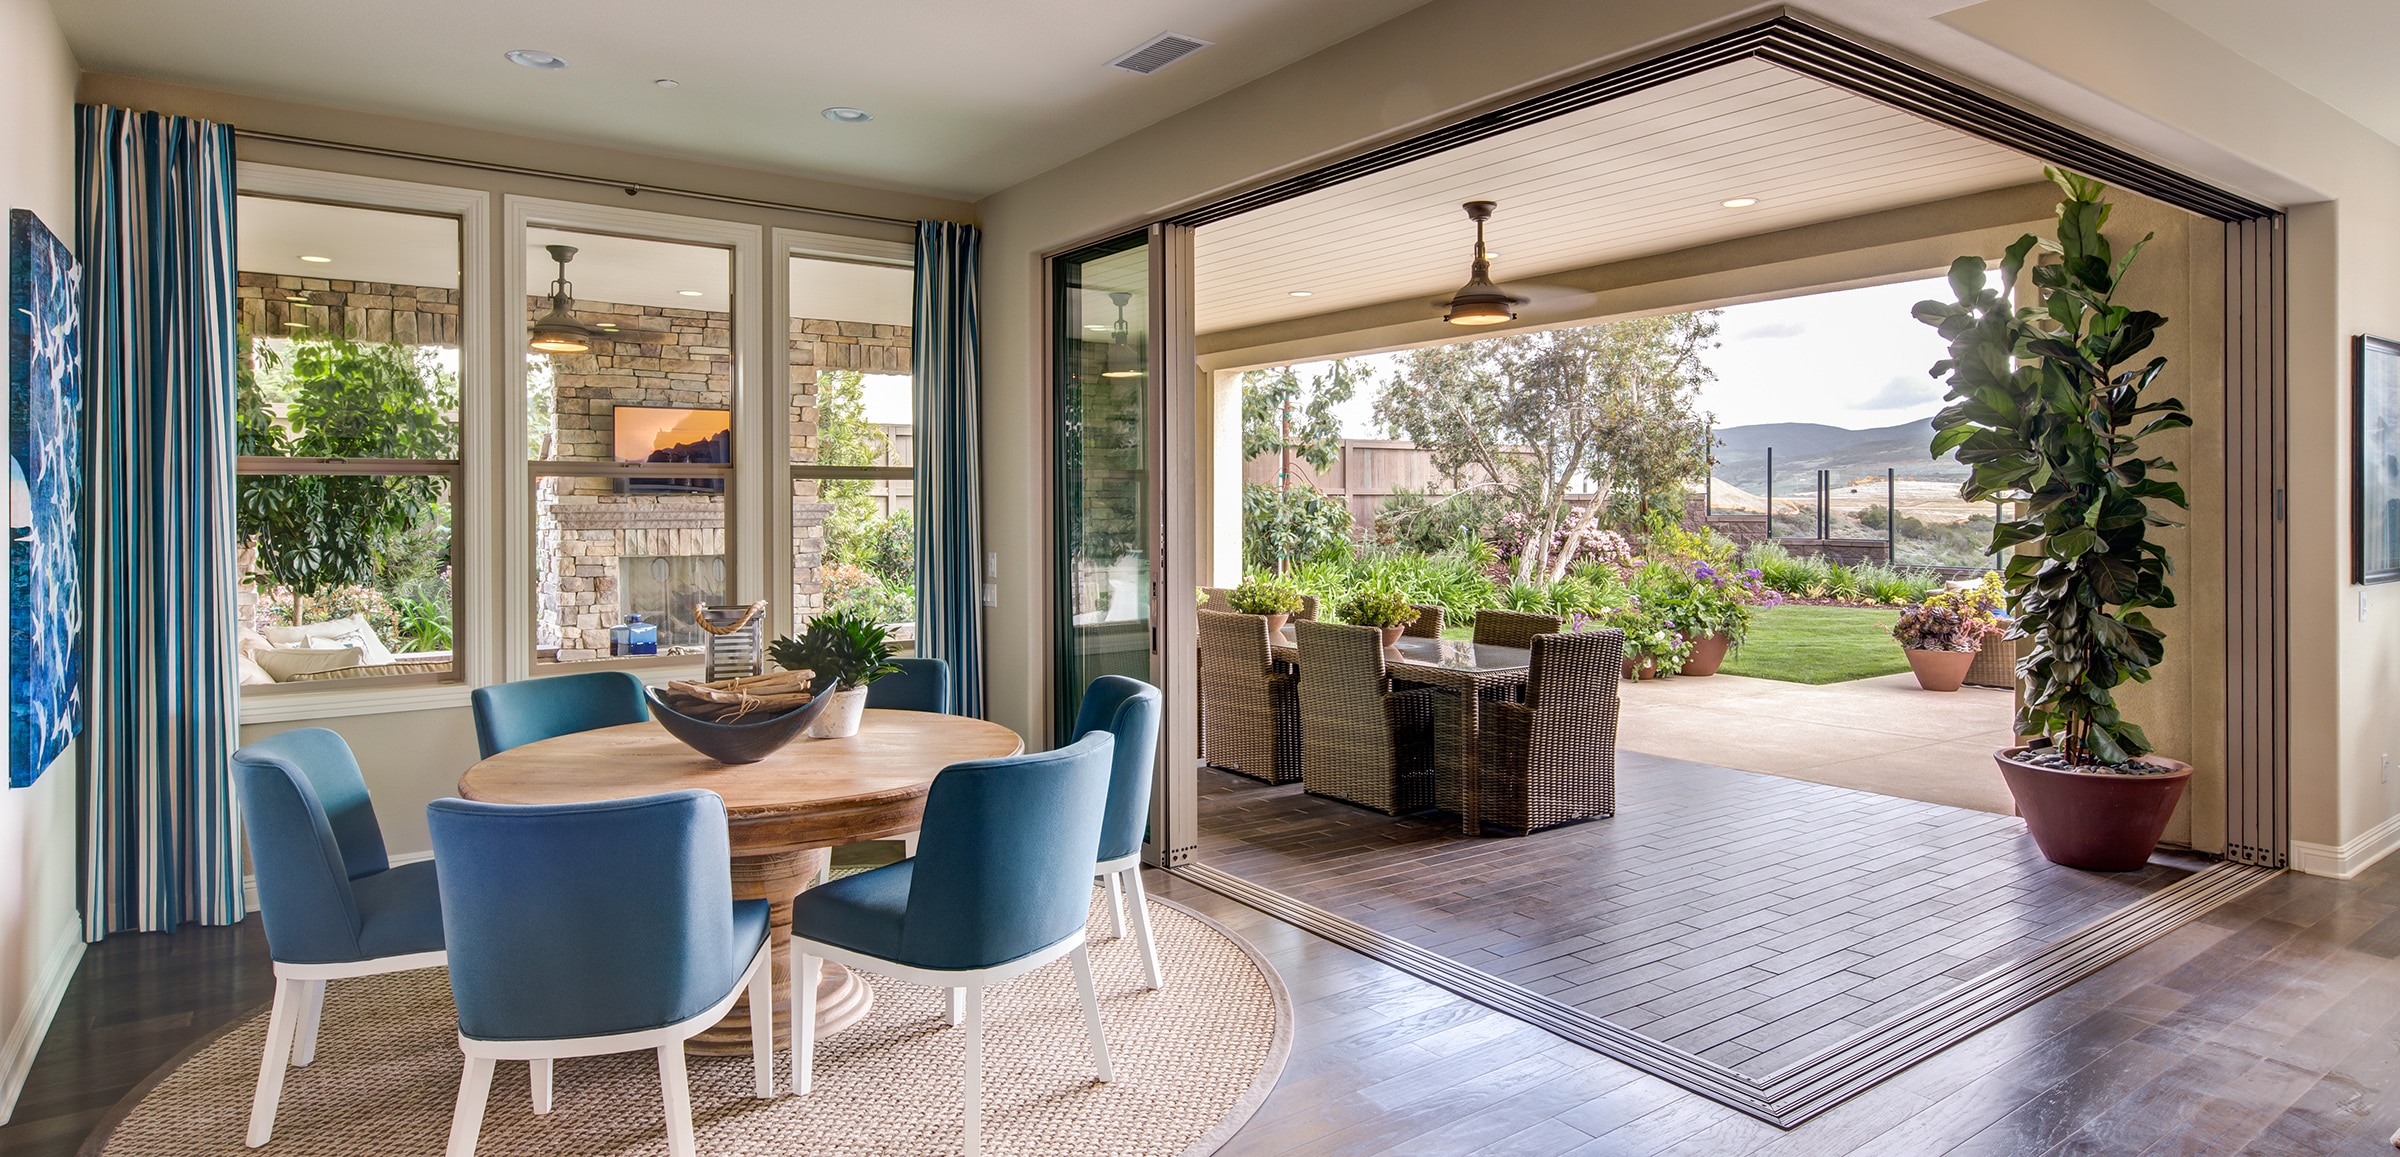 An indoor dining area seamlessly transitions to an outdoor dining area through pocketed multi-slide glass doors.